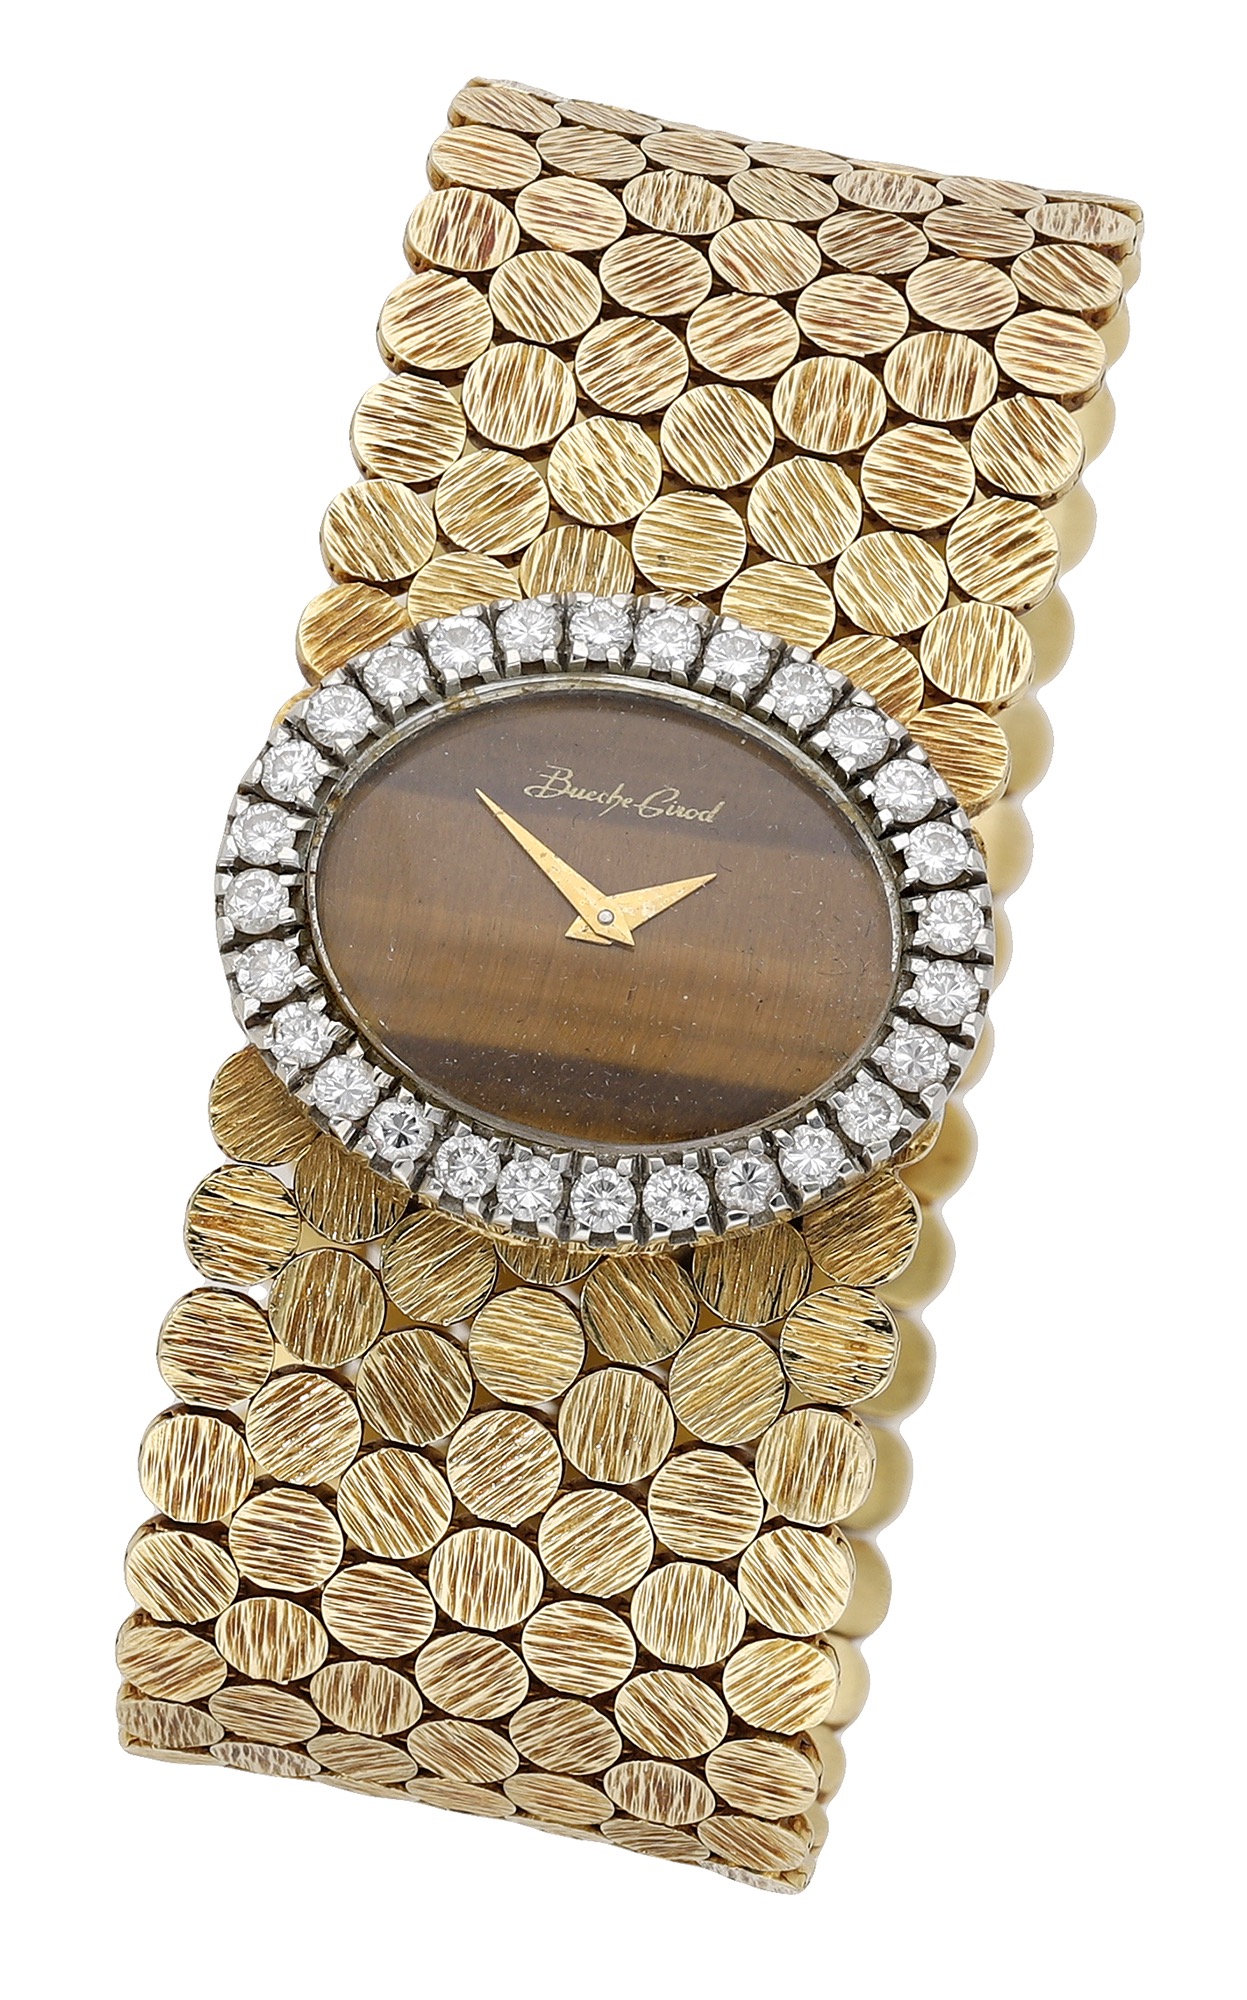 Bueche Girod. A gold and diamond-set bracelet watch with tiger's eye dial, circa 1971. Move...